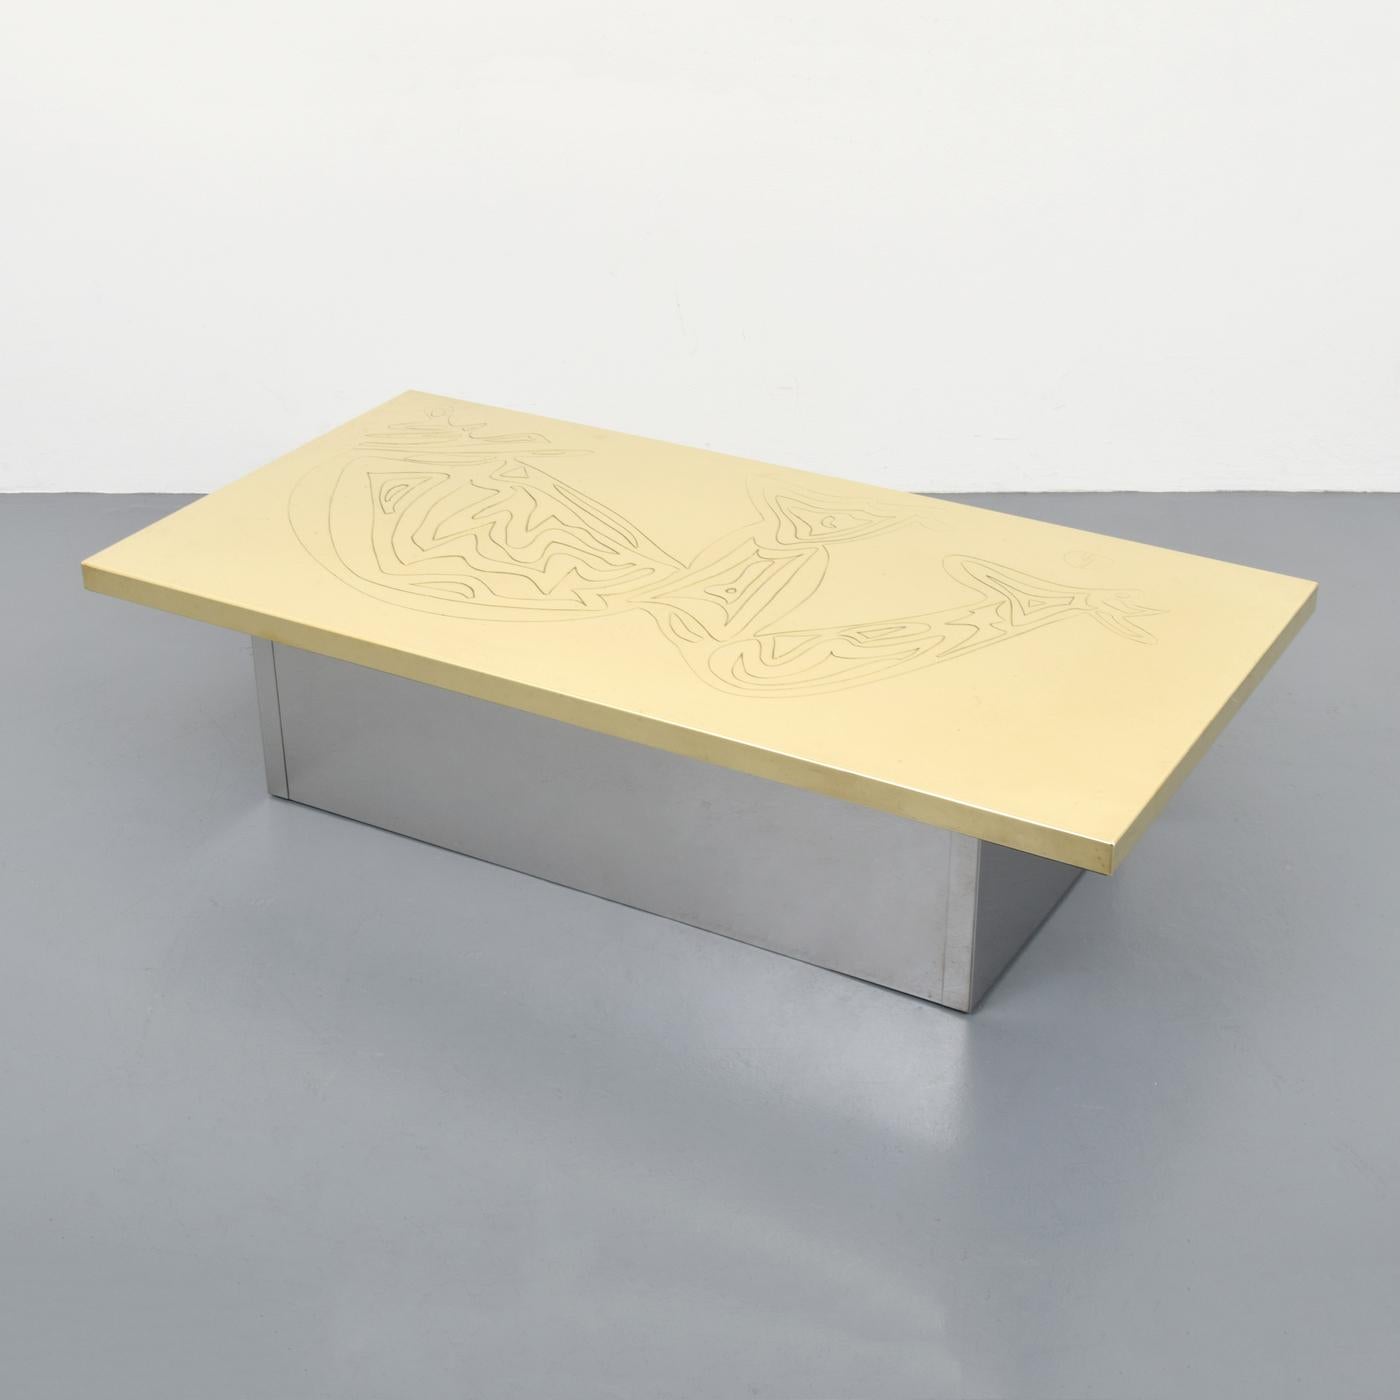 Coffee table by Guy de Jong. Please see our other matching table also listed on 1stdibs.

Materials: etched brass, chrome-plated brass. 